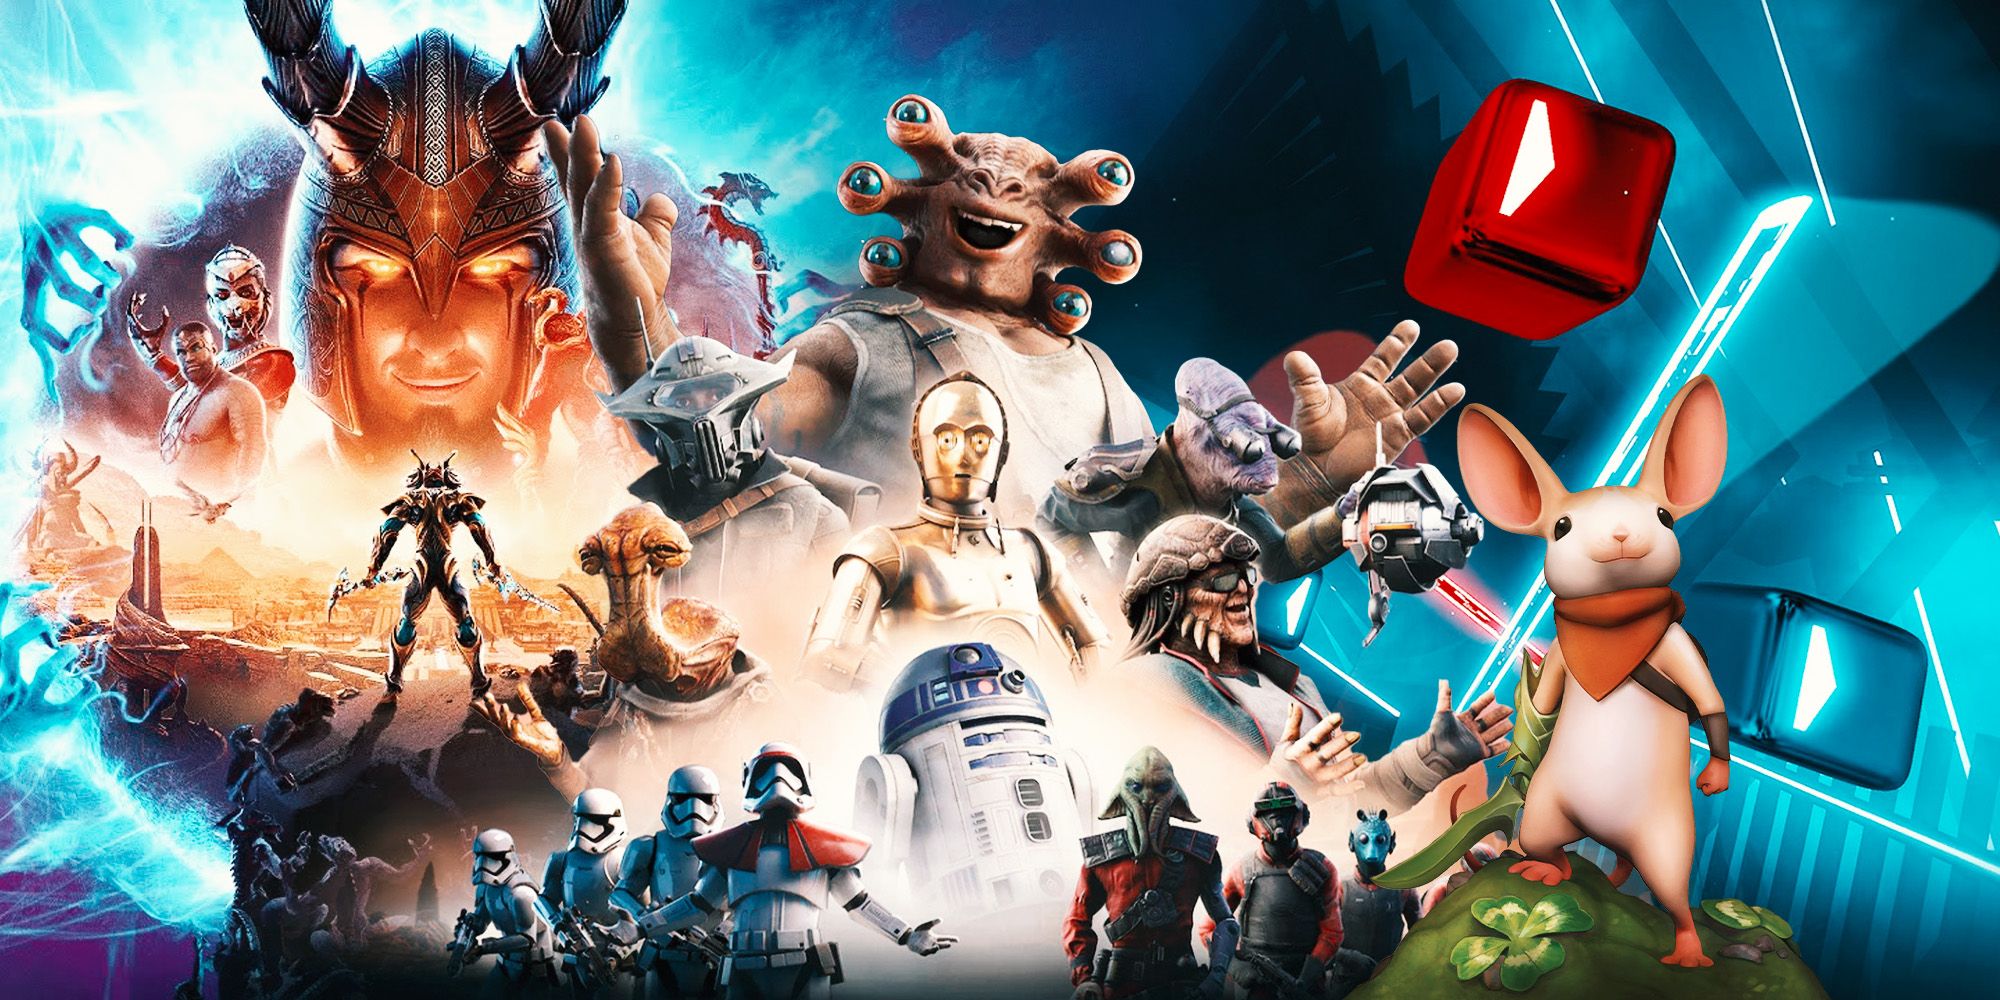 A collage of Star Wars characters, including Storm Troopers, R2D2, and Aliens, with a mouse in the foreground and armored warriors in the background. 